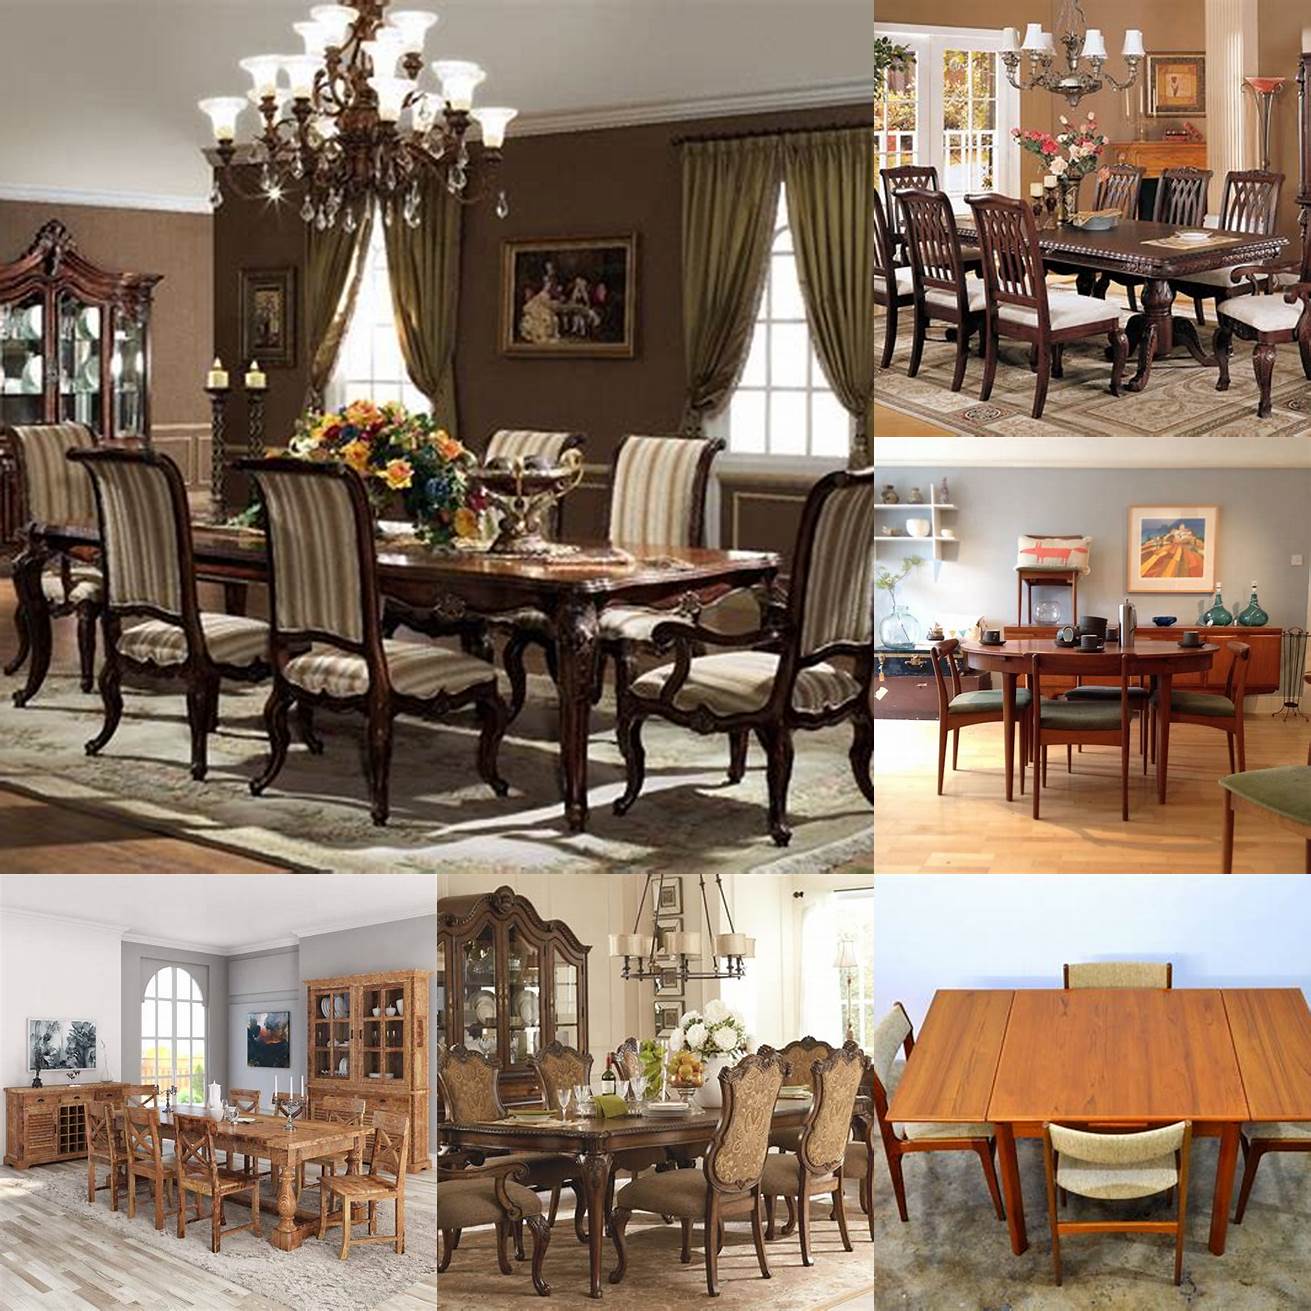 An image of a classic elegant dining room with a teak table